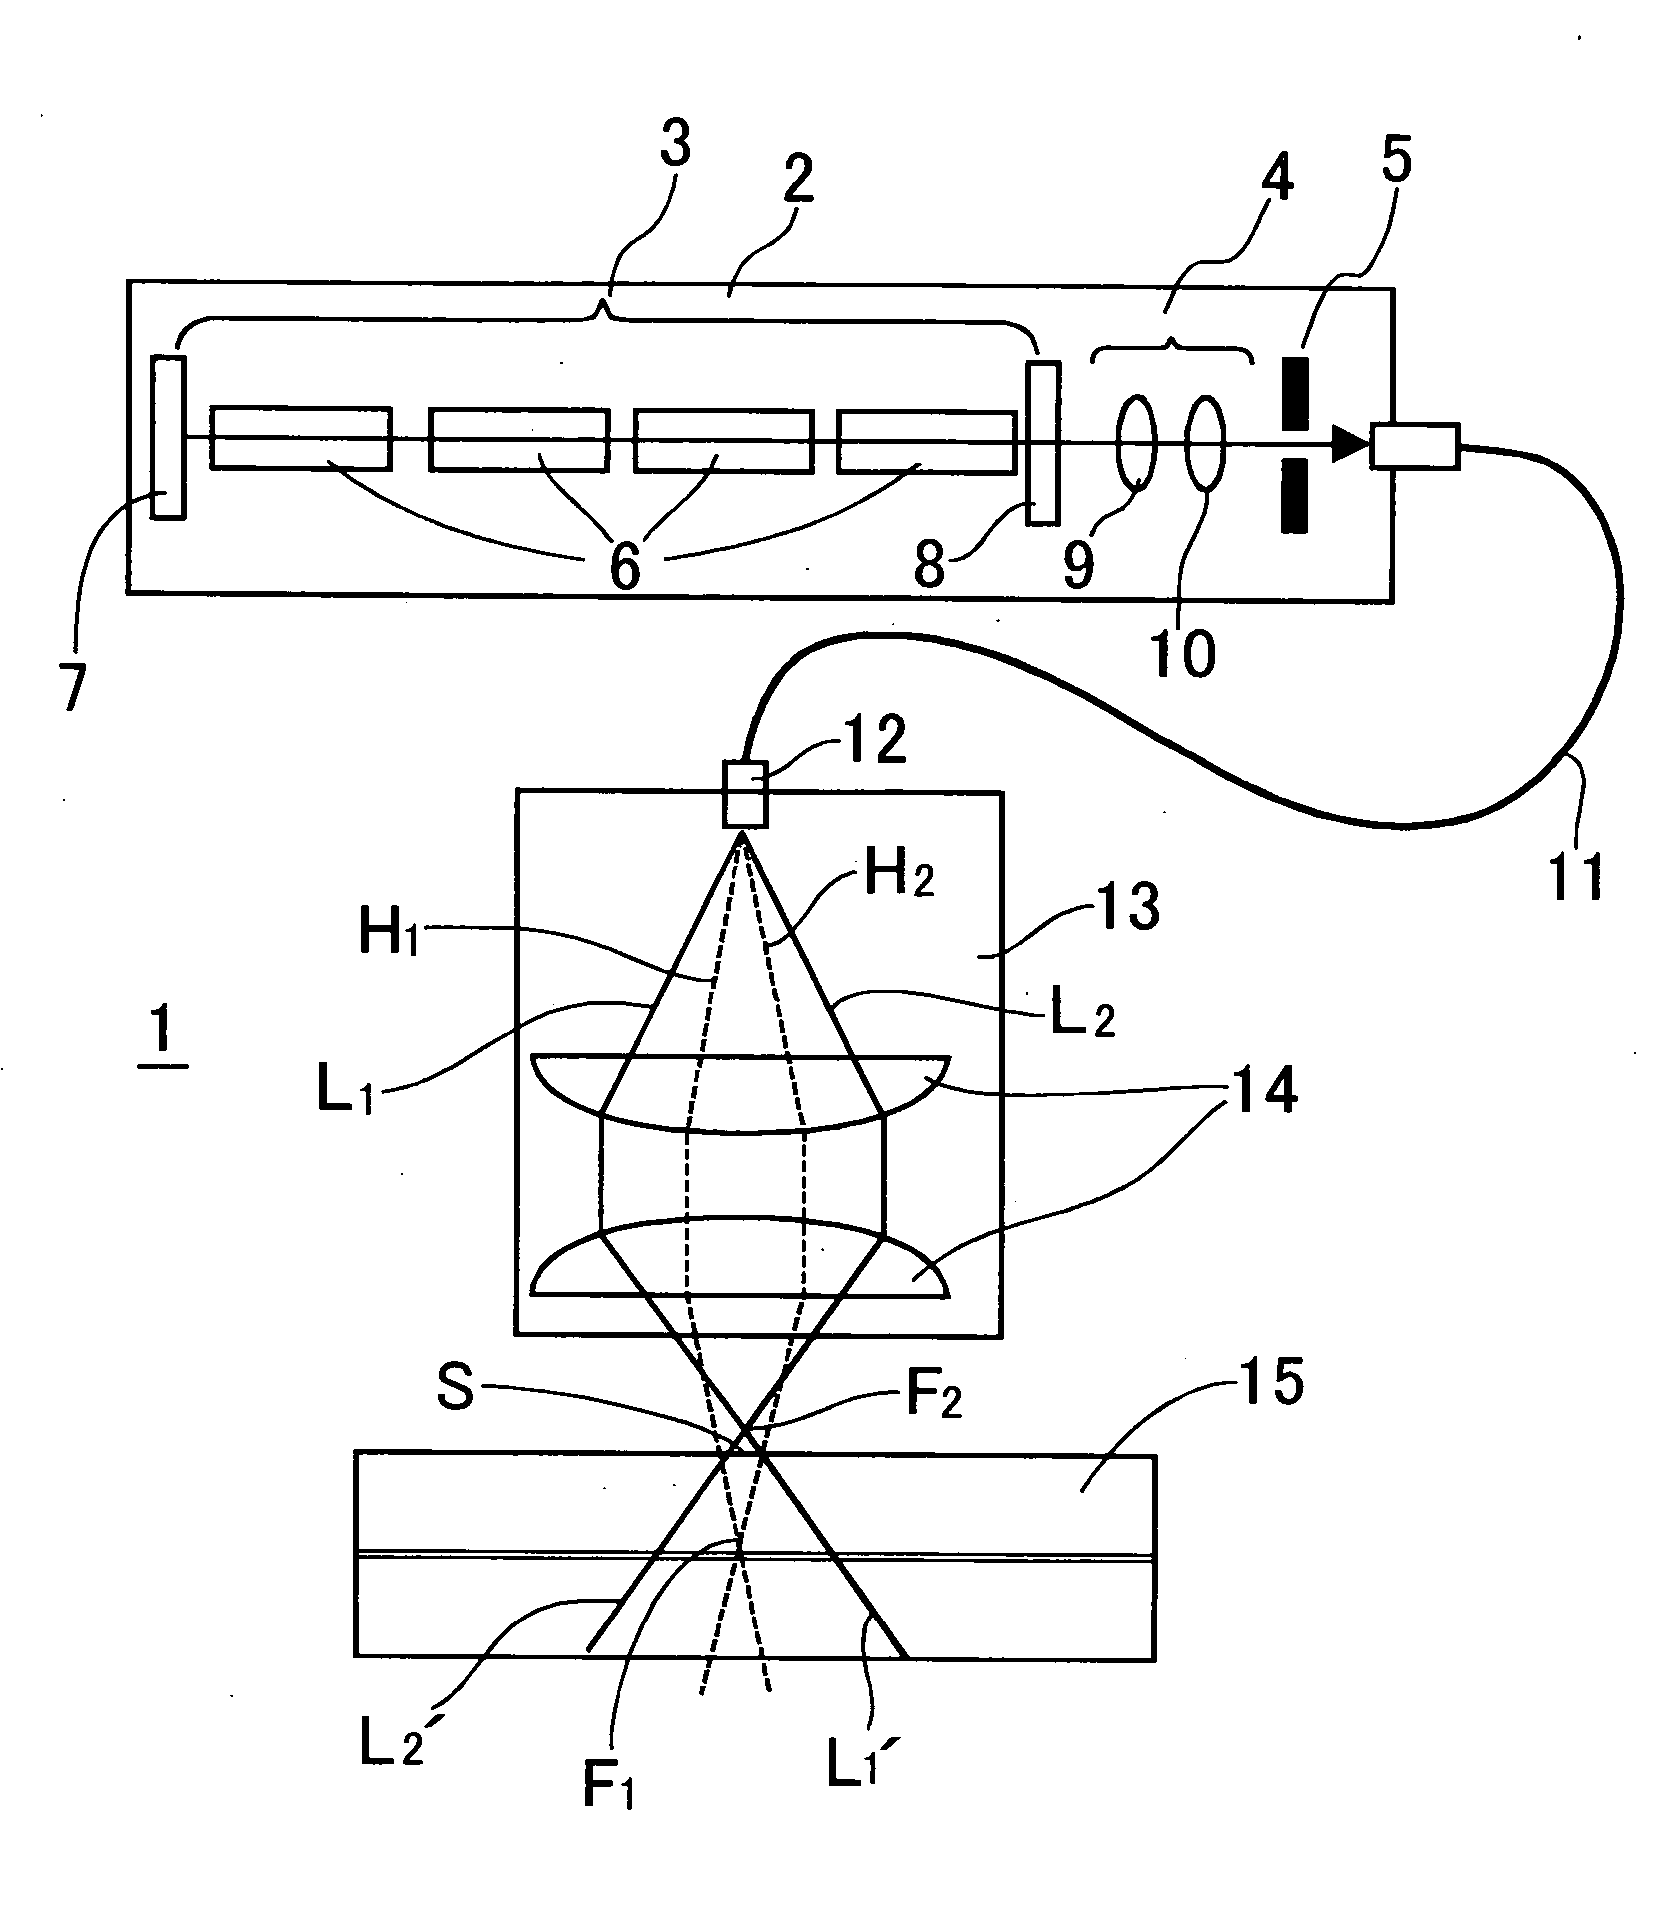 Solid-state laser processing apparatus and laser welding process